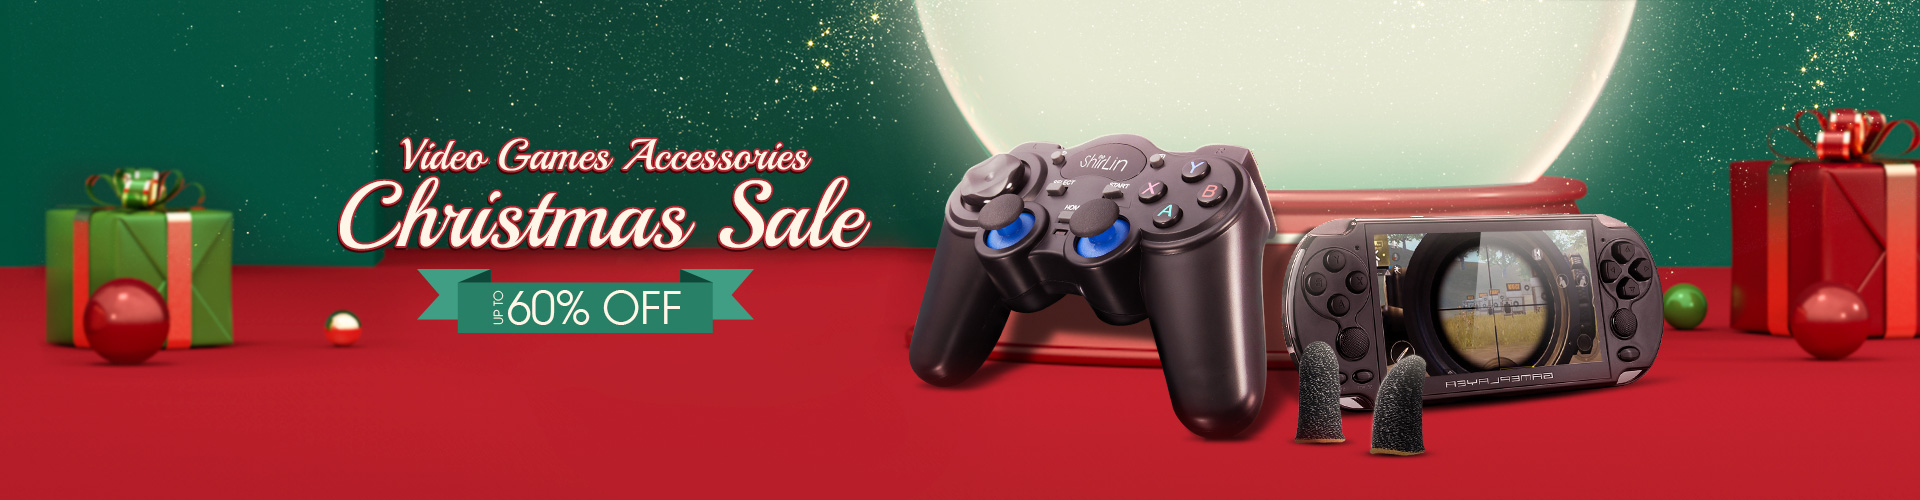 Up to 60% OFF Video Games Accessories Christmas Sale